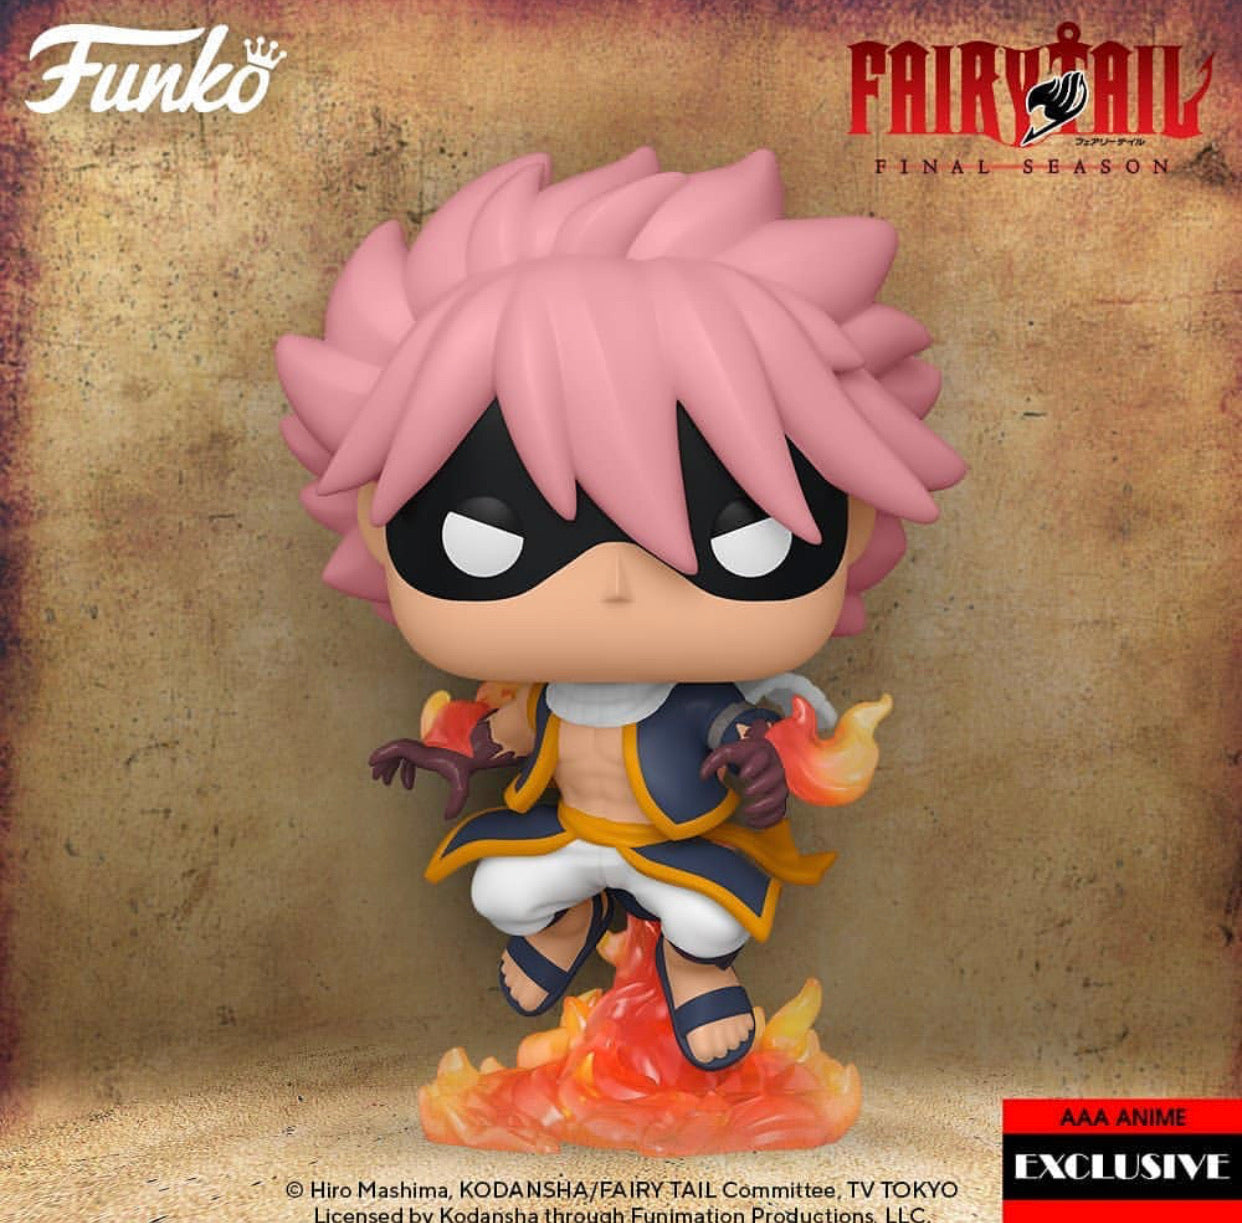 Fairy Tail Etherious Natsu Dragneel E.N.D. Pop! Vinyl Figure - AAA Anime Exclusive(PREORDER)